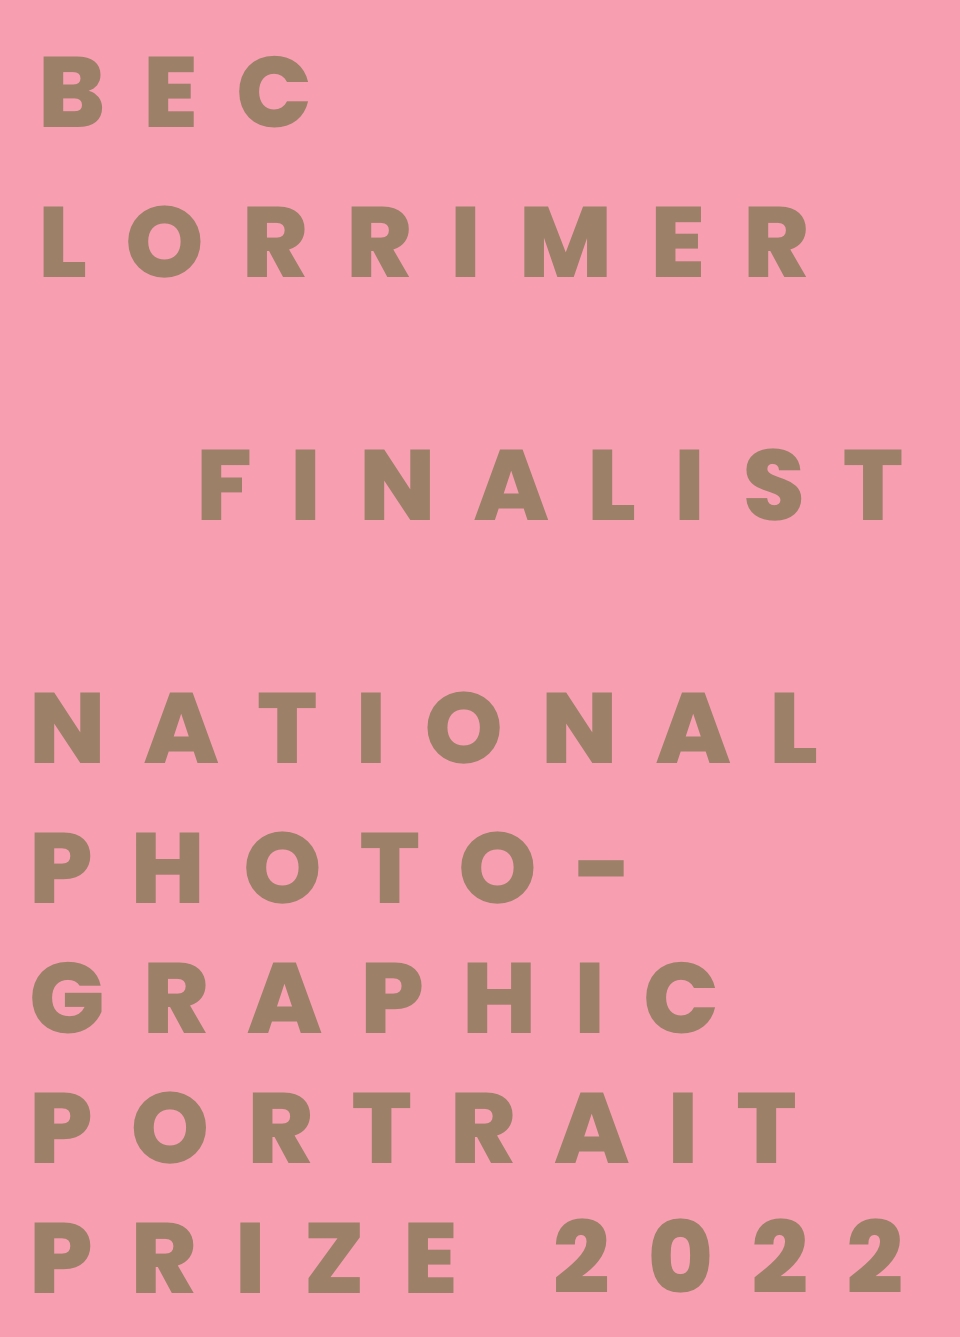 BEC LORRIMER FINALIST IN THE NATIONAL PHOTOGRAPHIC PORTRAIT PRIZE 2022